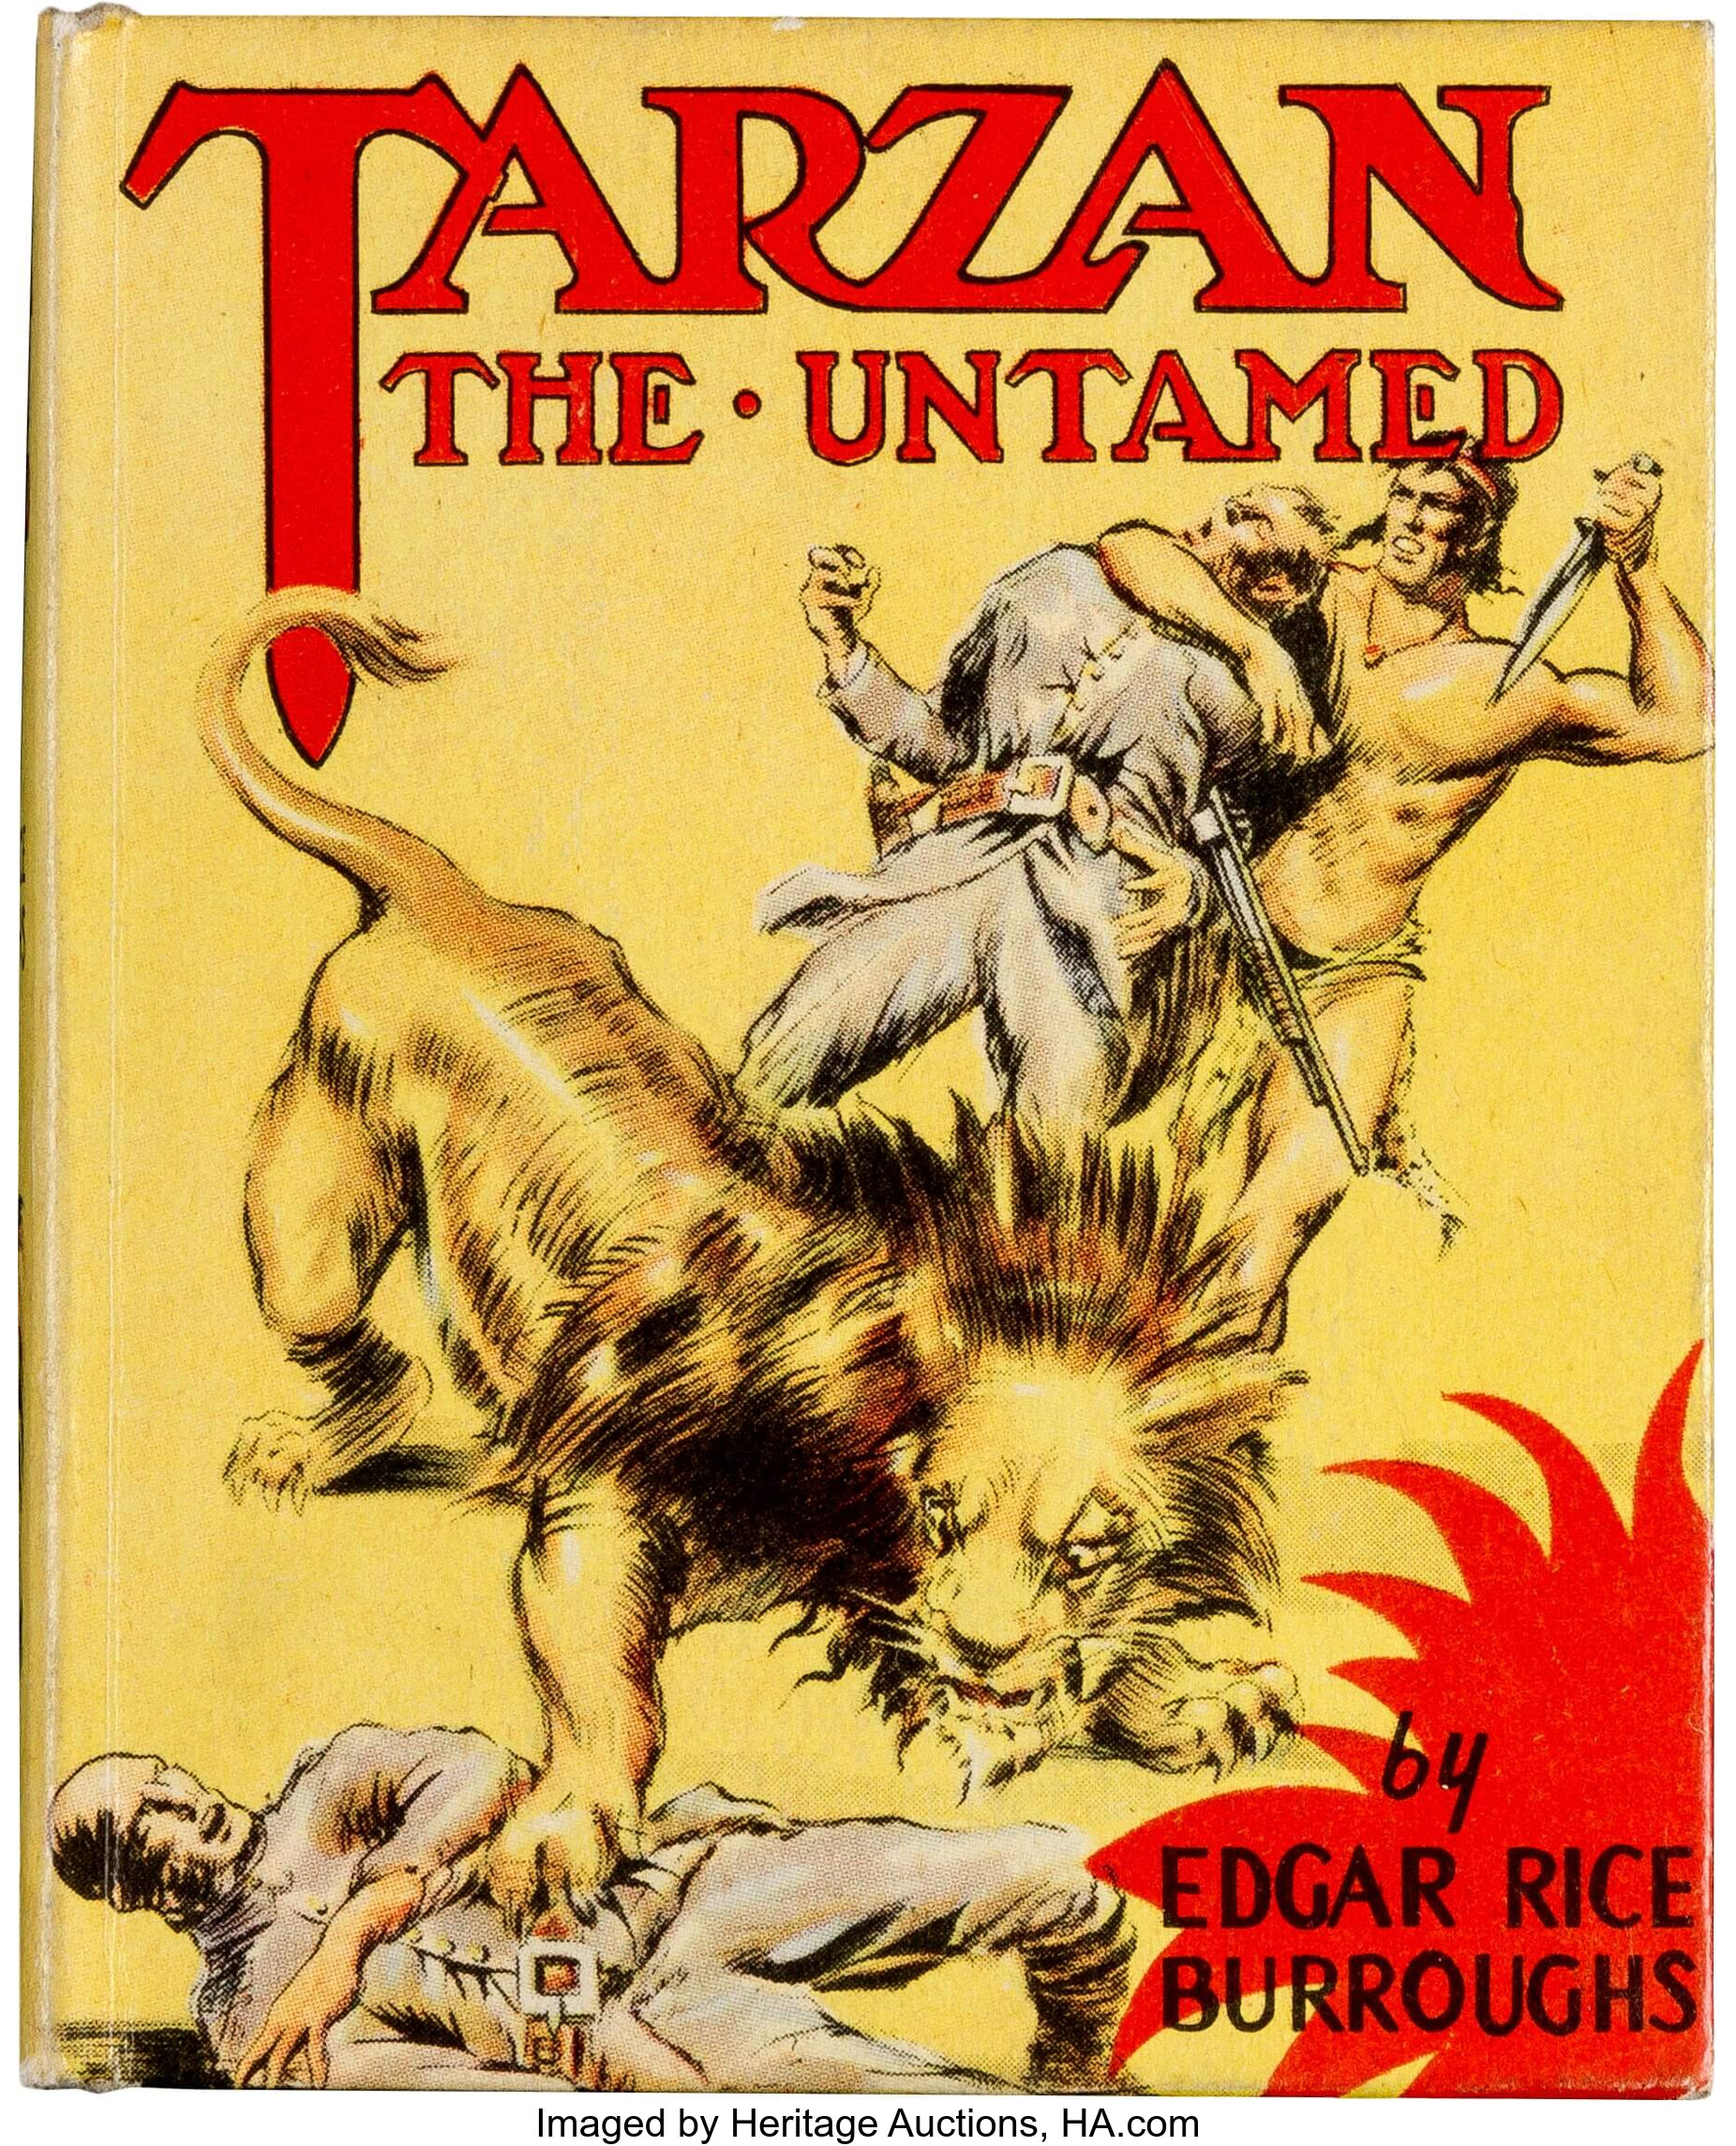 Big Little Book 1452 Tarzan The Untamed Whitman 1941 Condition Lot 11716 Heritage Auctions